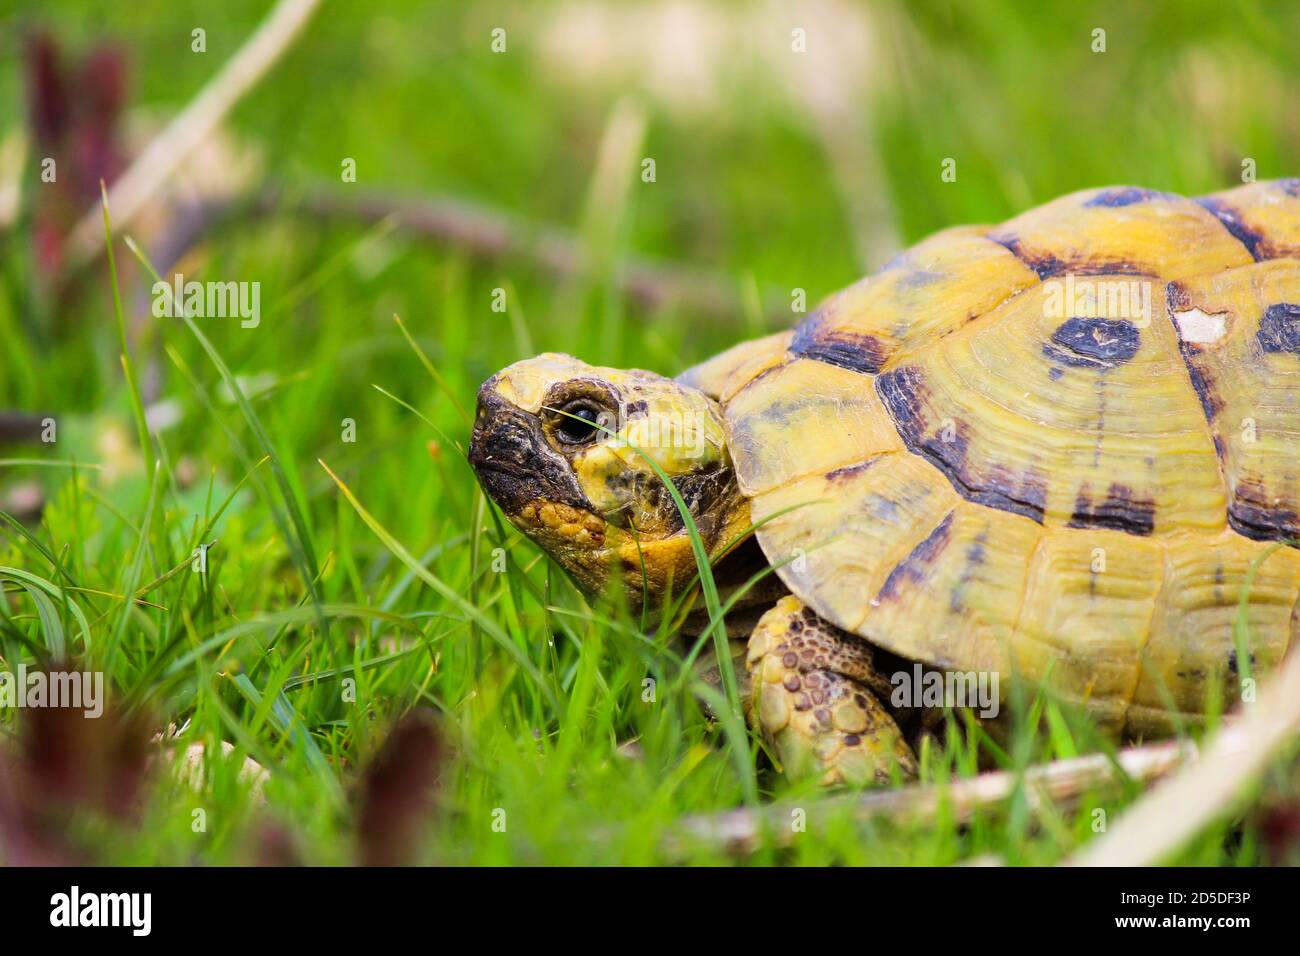 A turtle walking on grass and eating Stock Photo